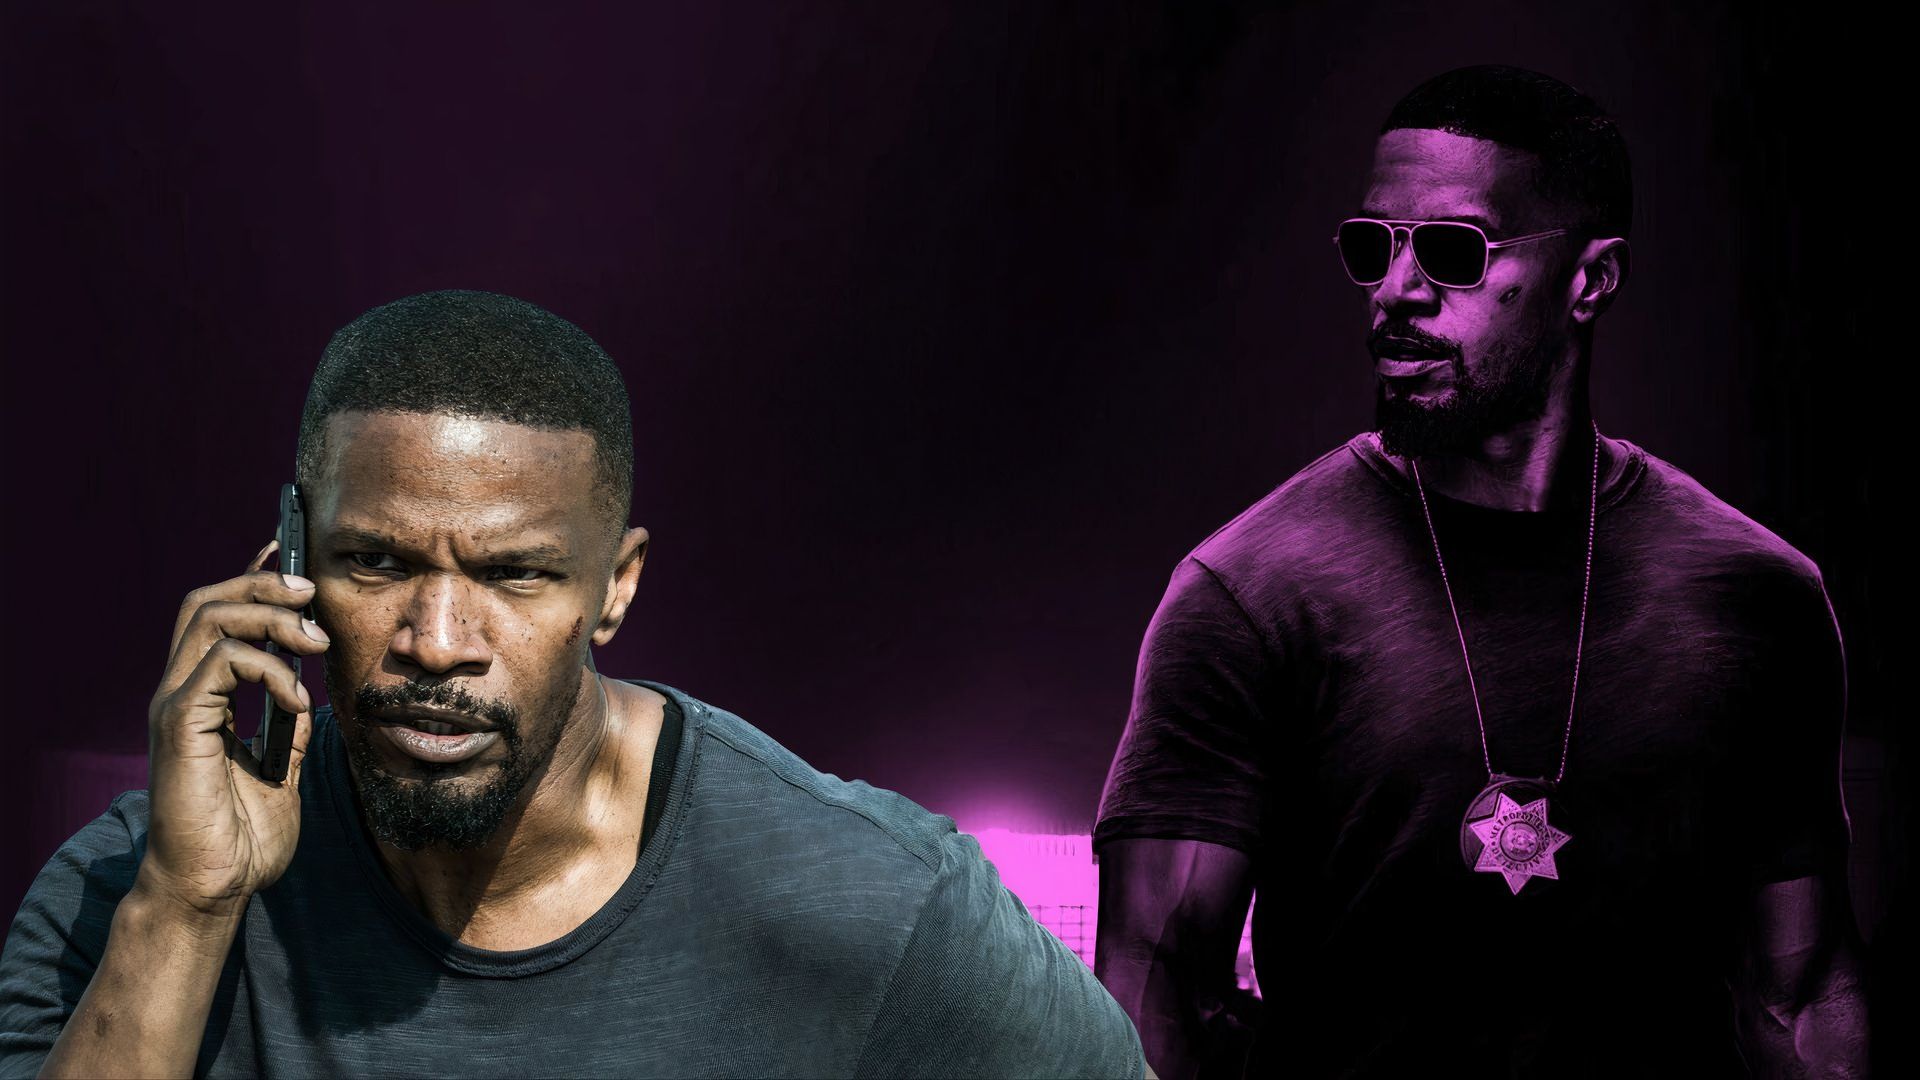 An edited image of Jamie Foxx on the phone and wearing a sheriff badge in Sleepless